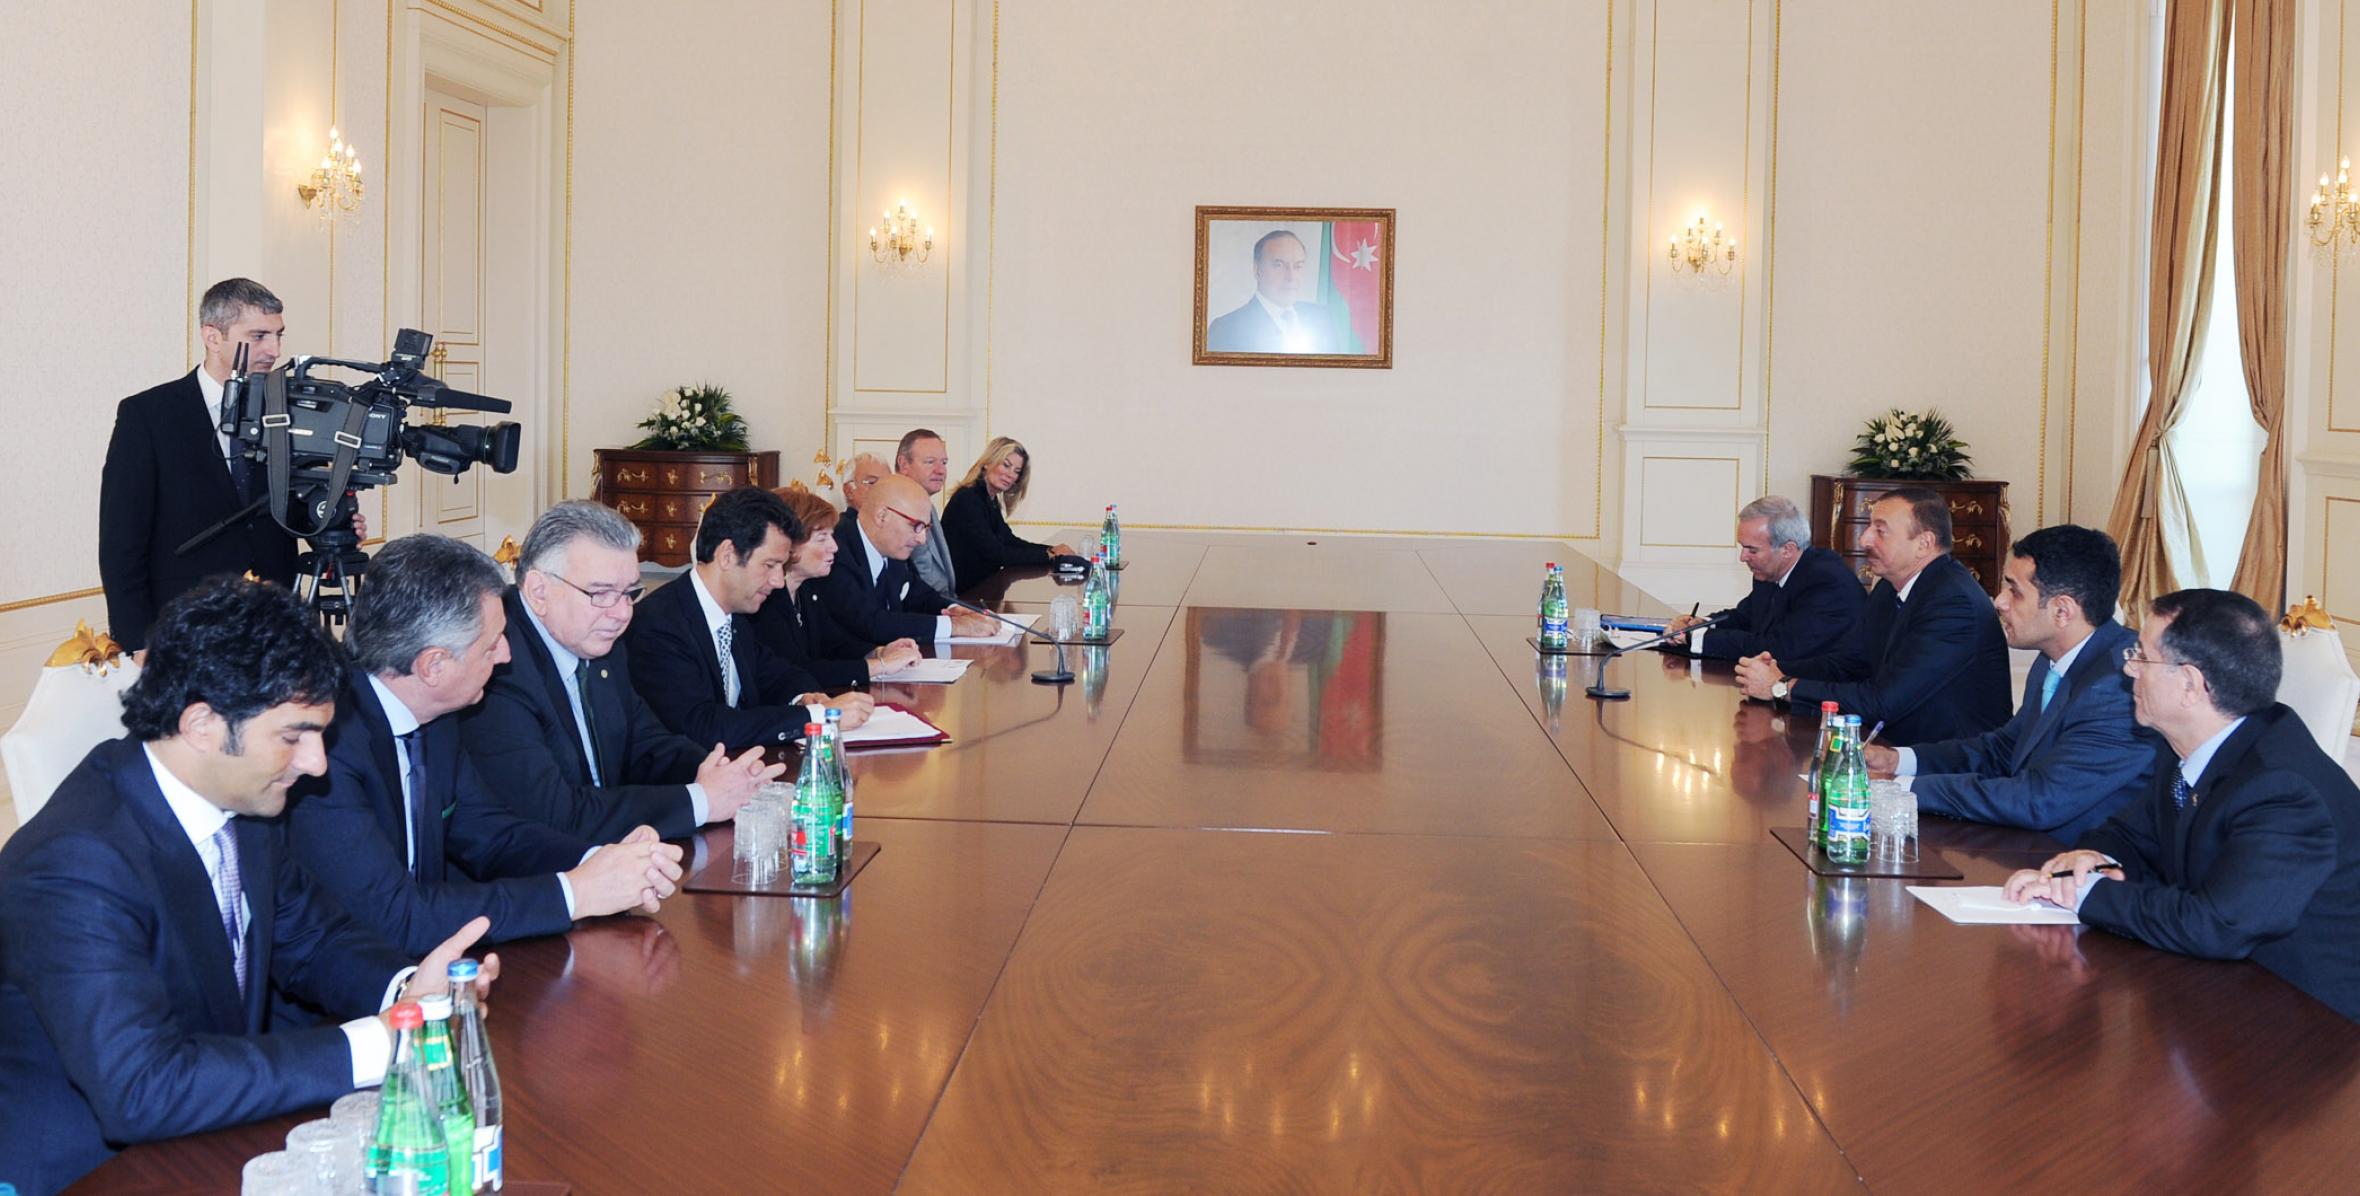 Ilham Aliyev received a delegation led by the head of the Italy-Azerbaijan inter-parliamentary friendship group